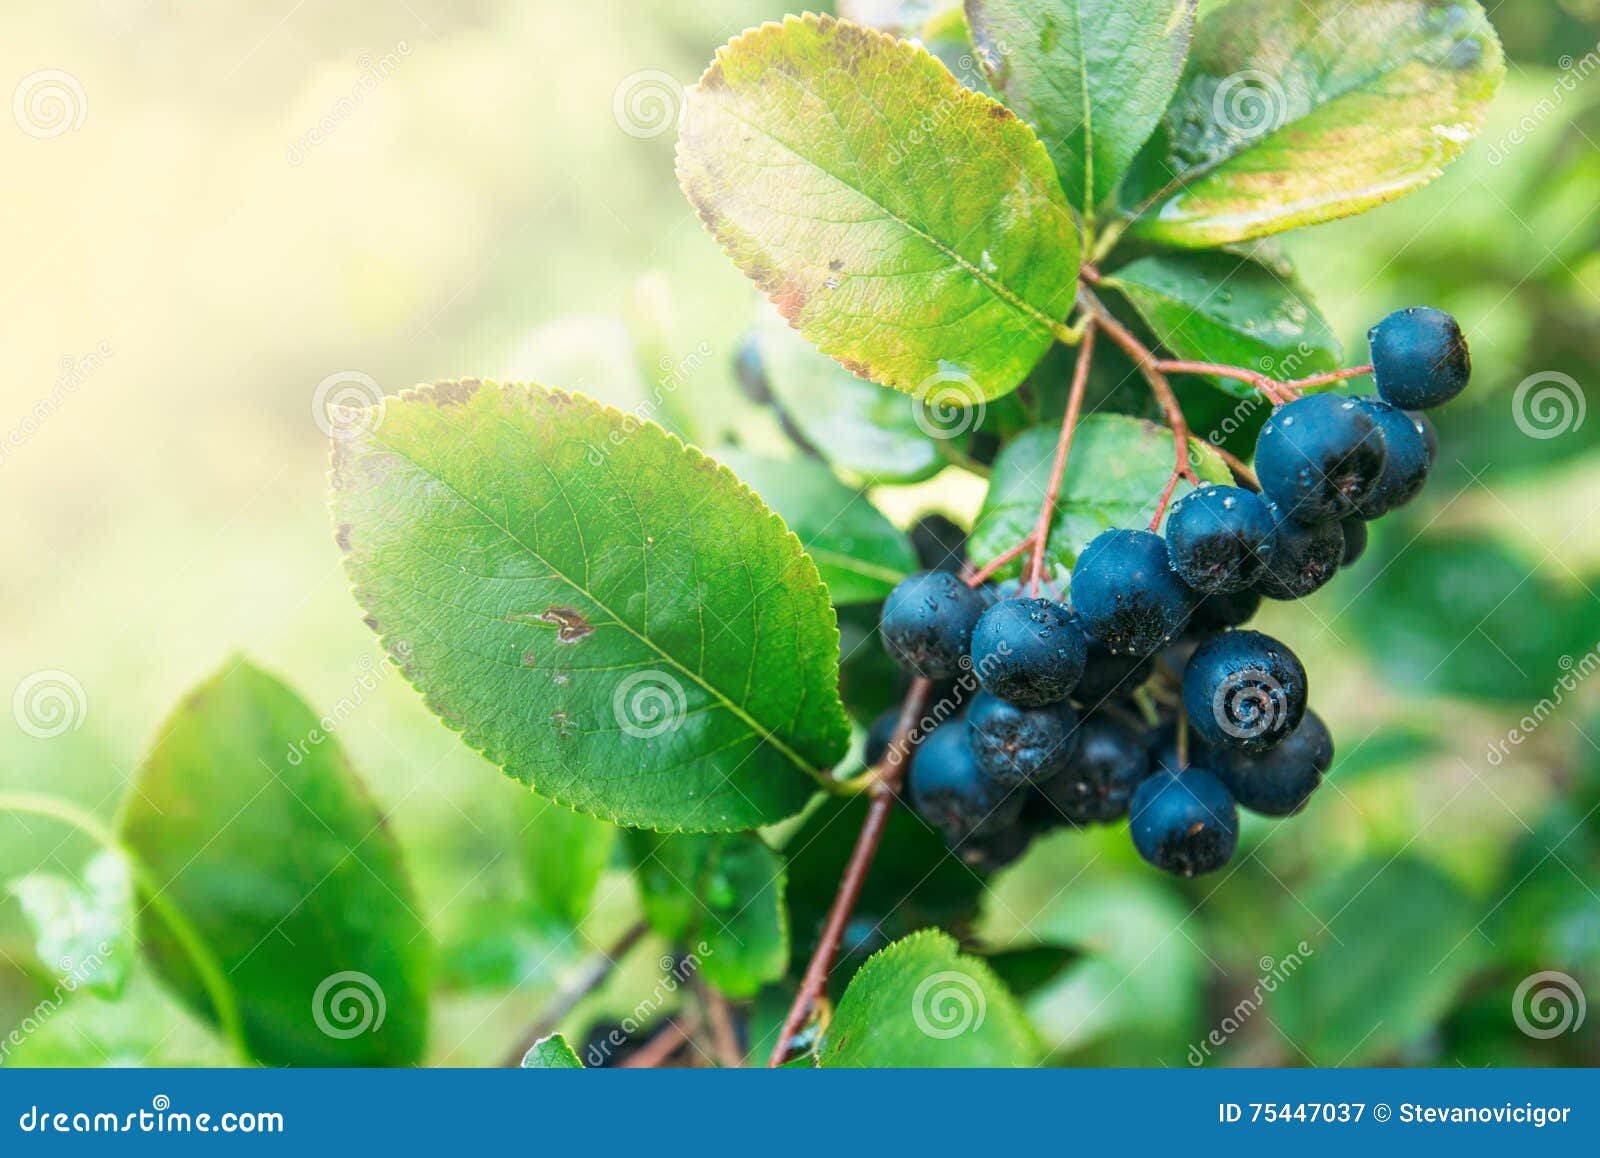 fruitful ripe aronia berry fruit on the branch